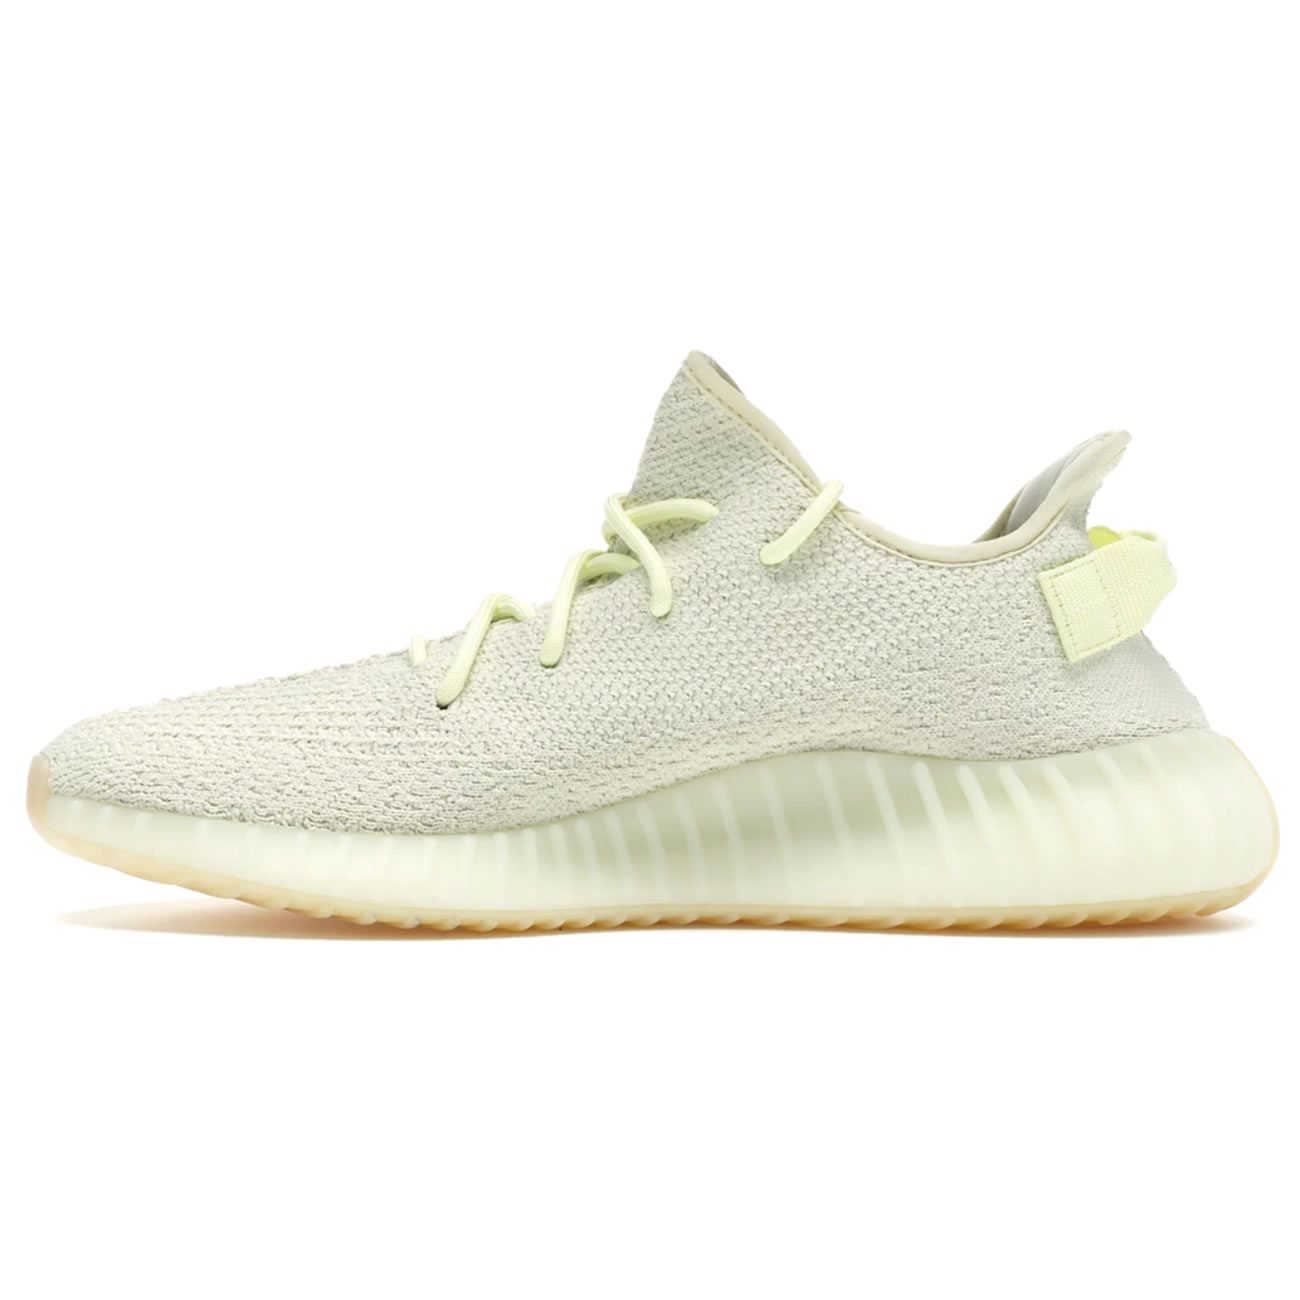 adidas Yeezy BOOST 350 V2 "Peanut Butter" F36980 Release Date